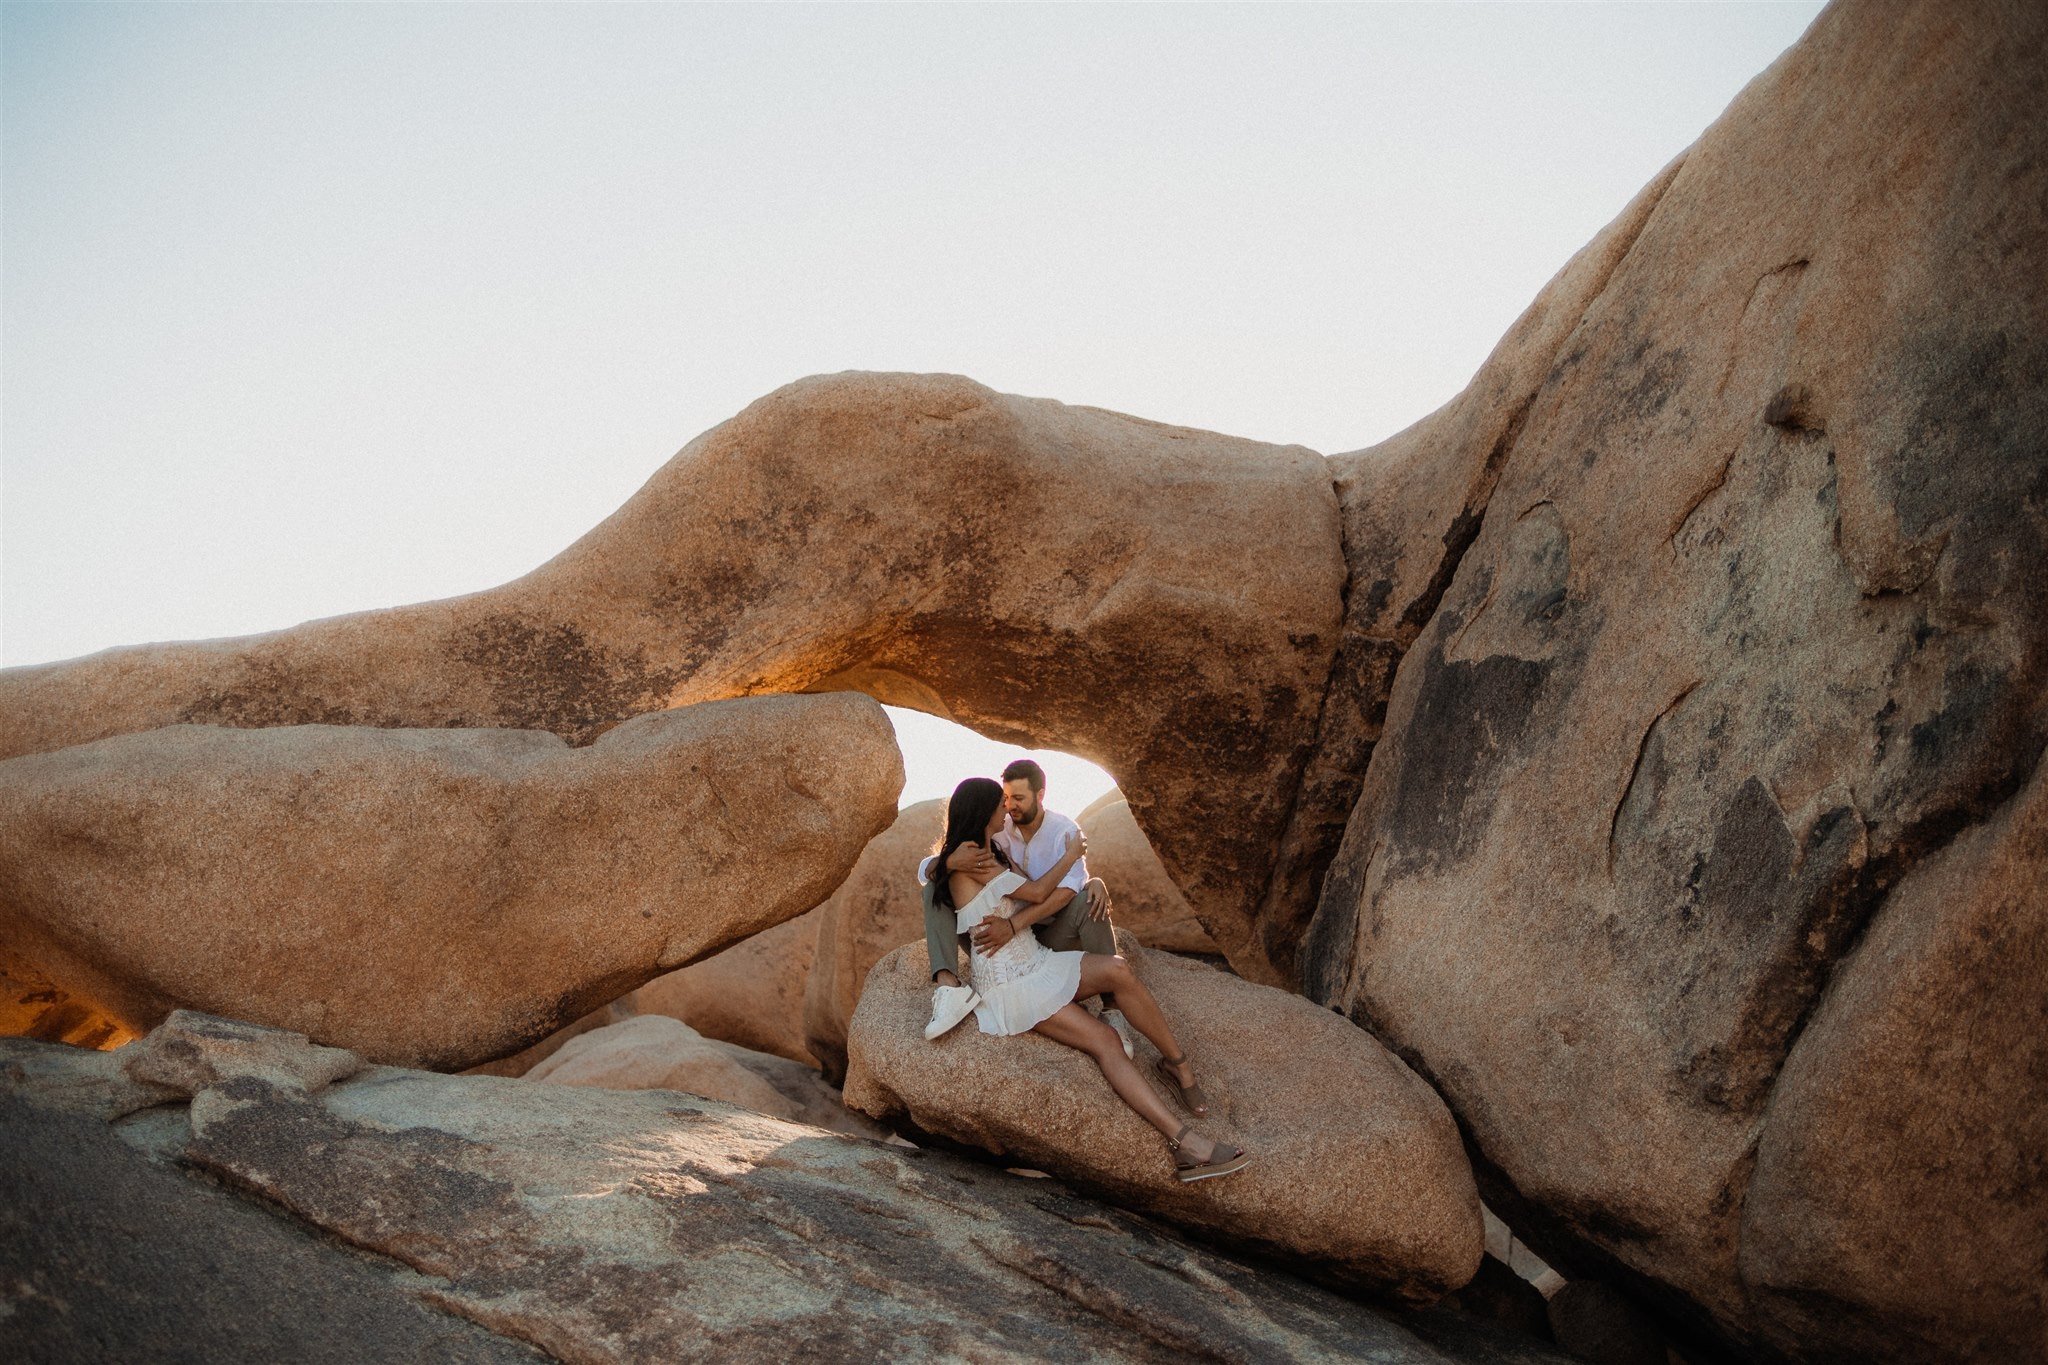 Joshua Tree Couples Session Surprise Proposal - Will Khoury Photography_36.jpg